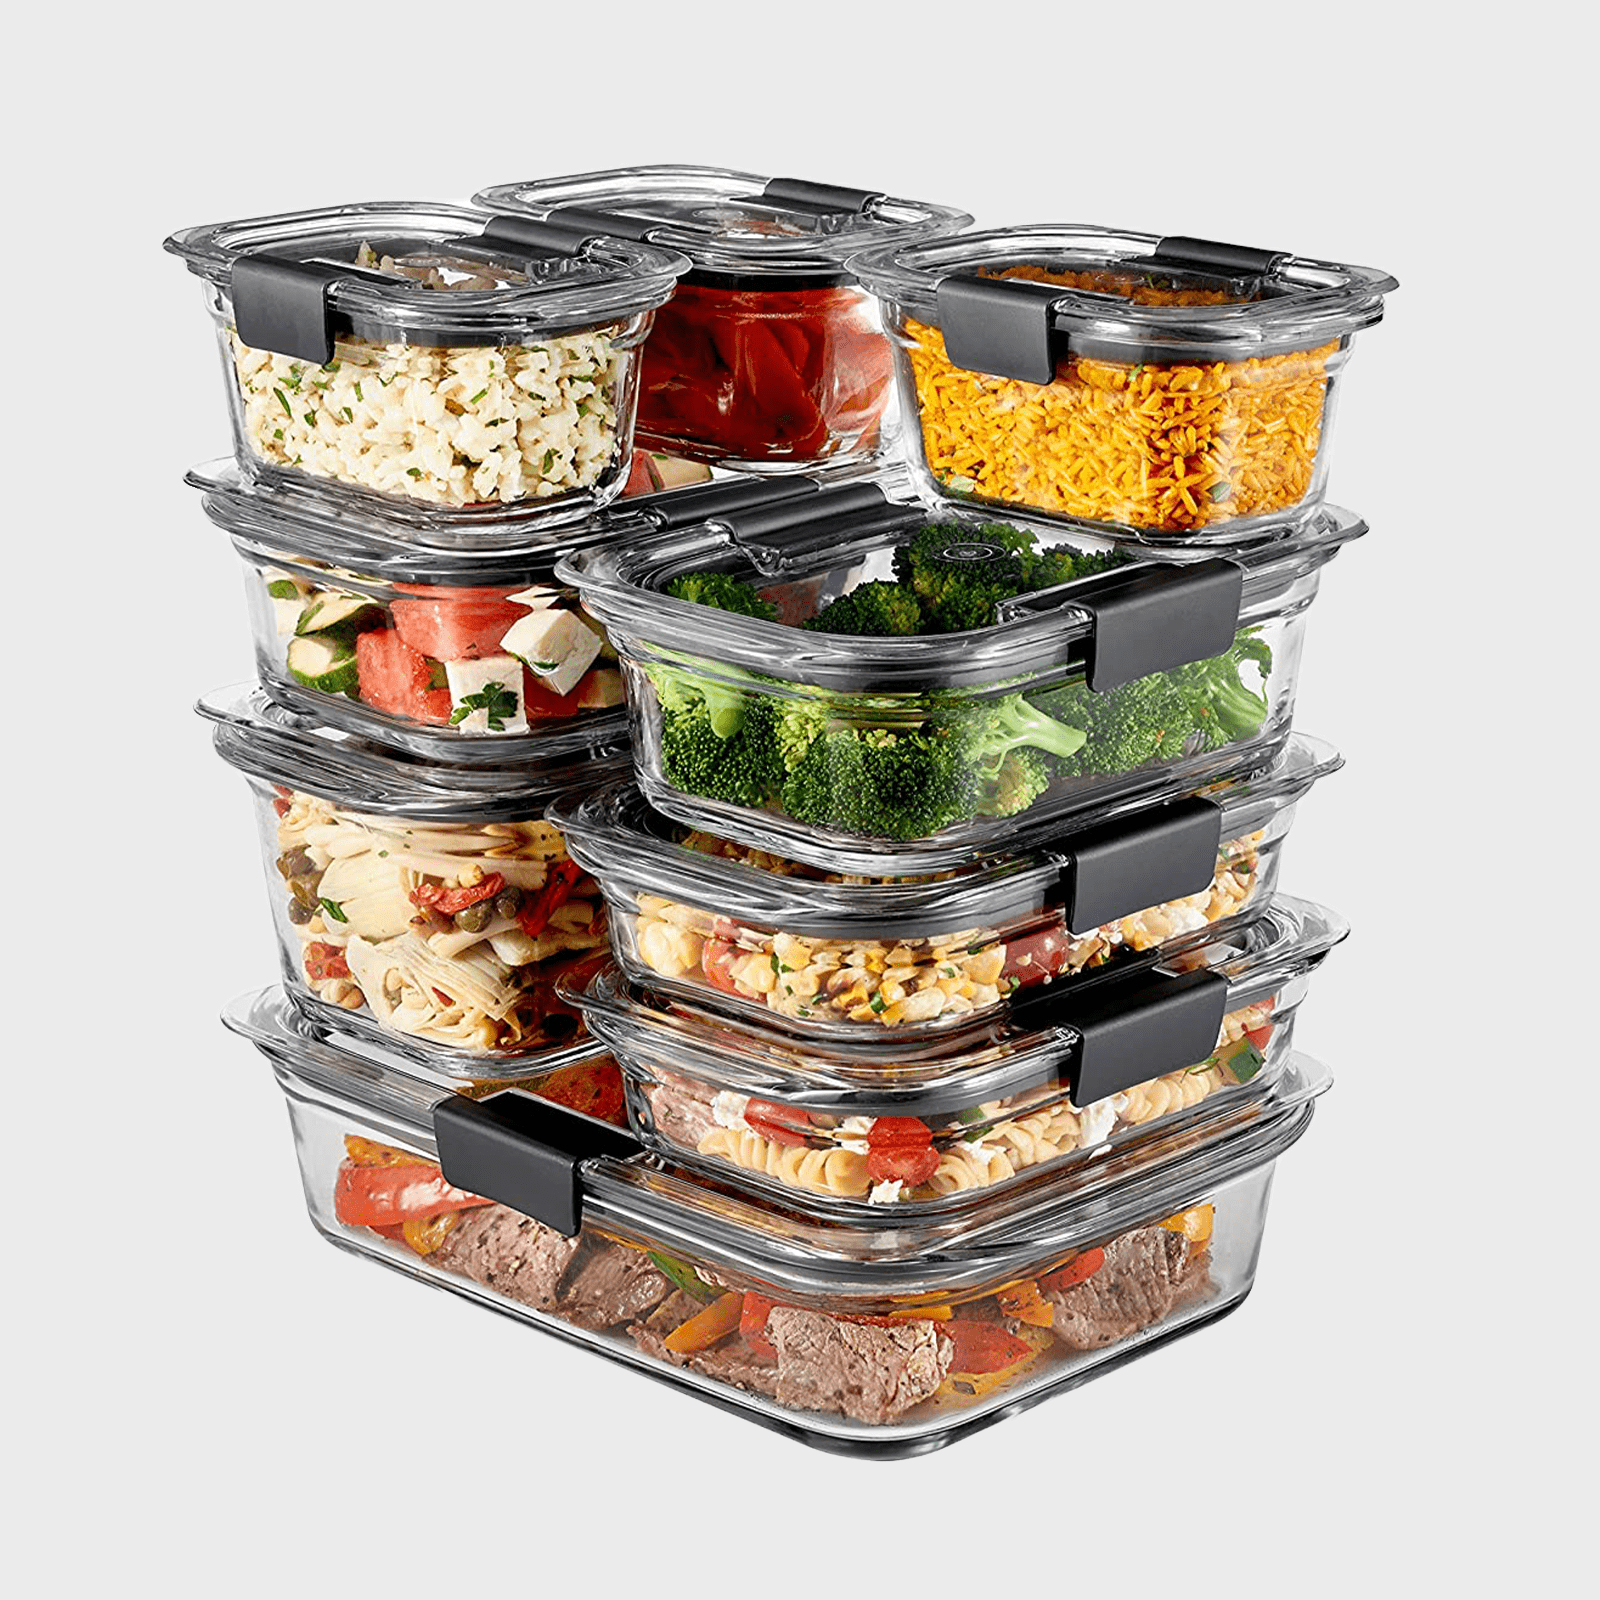 These are the best glass storage containers on